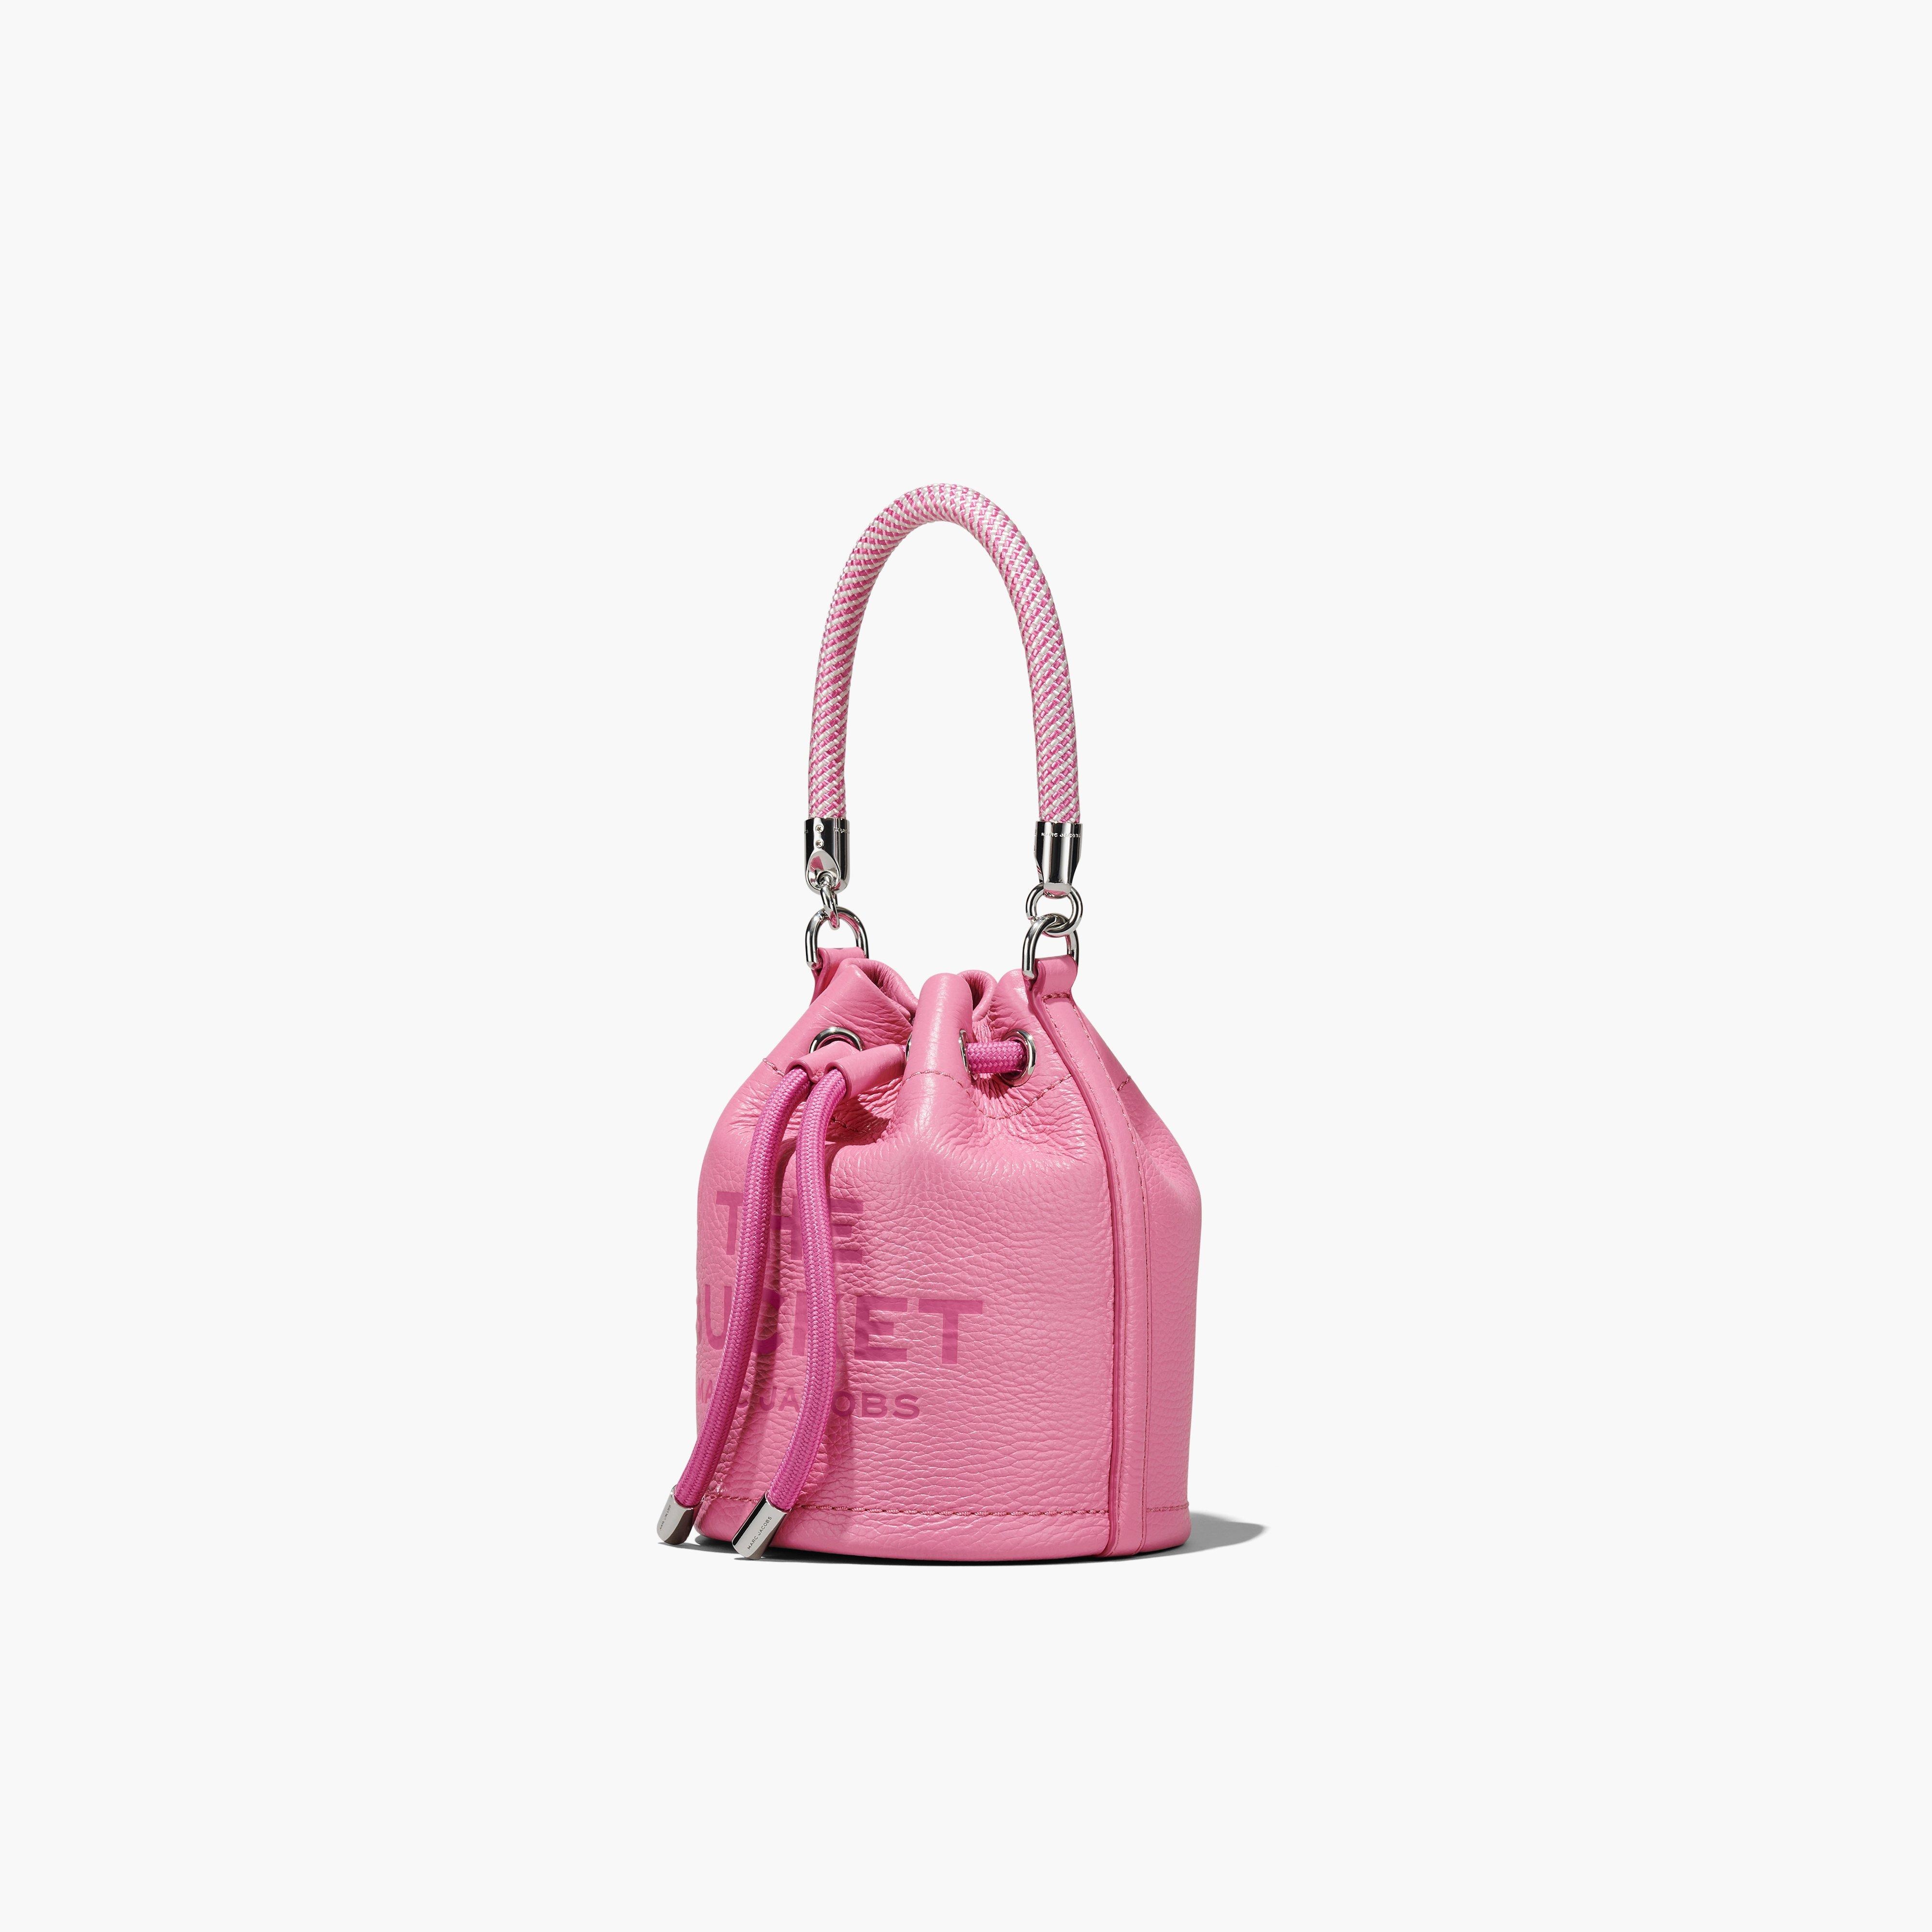 THE LEATHER MICRO BUCKET BAG - 5